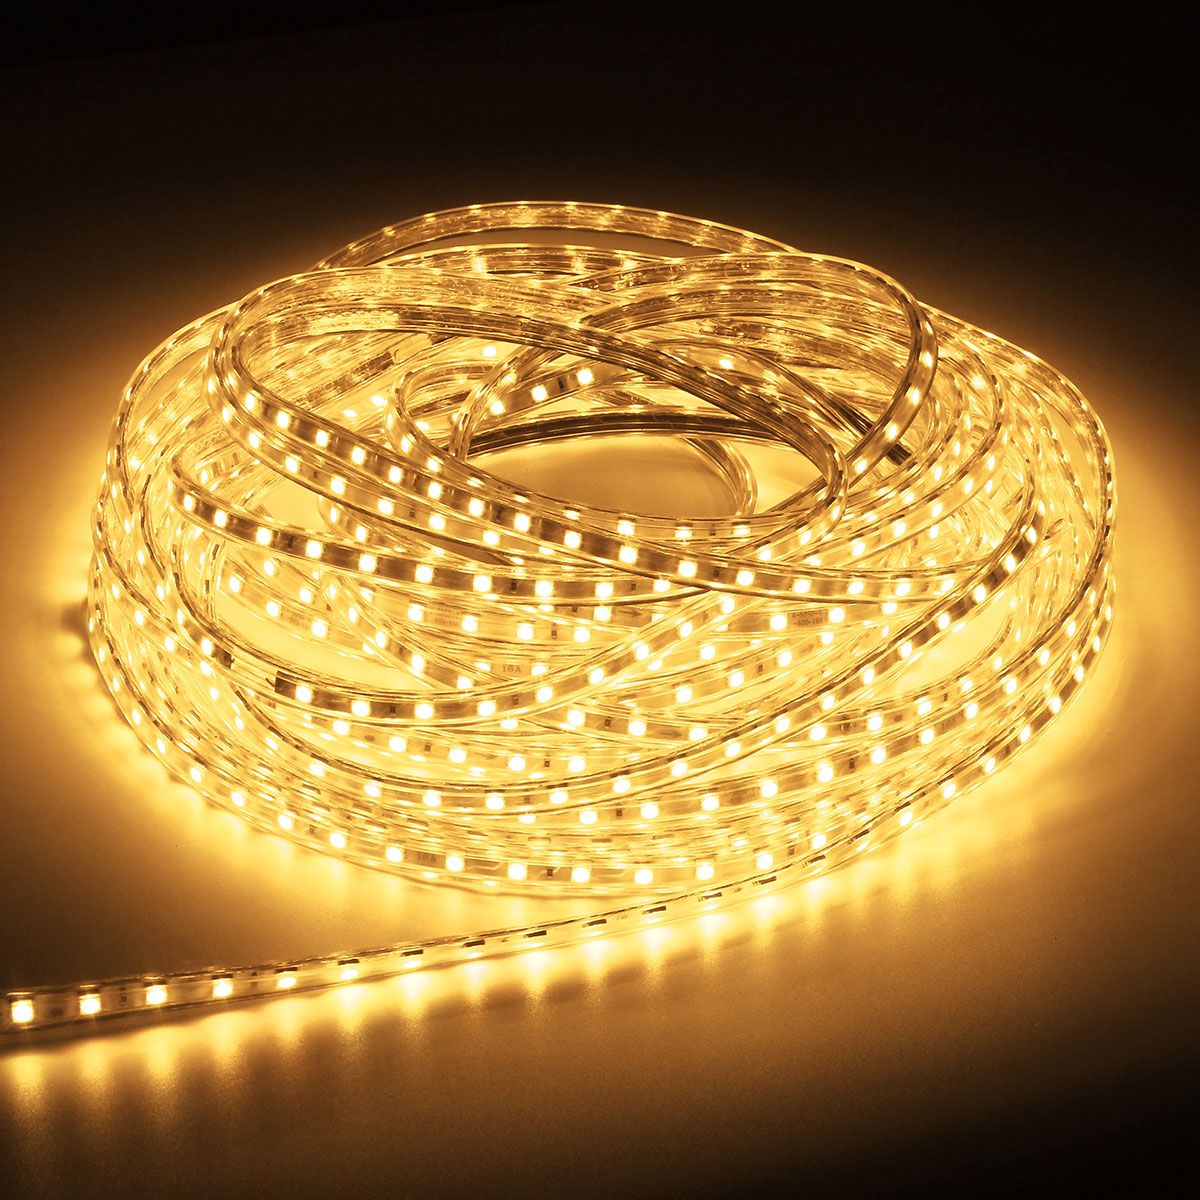 20M-5050-LED-SMD-Outdoor-Waterproof-Flexible-Tape-Rope-Strip-Light-Xmas-220V-1080114